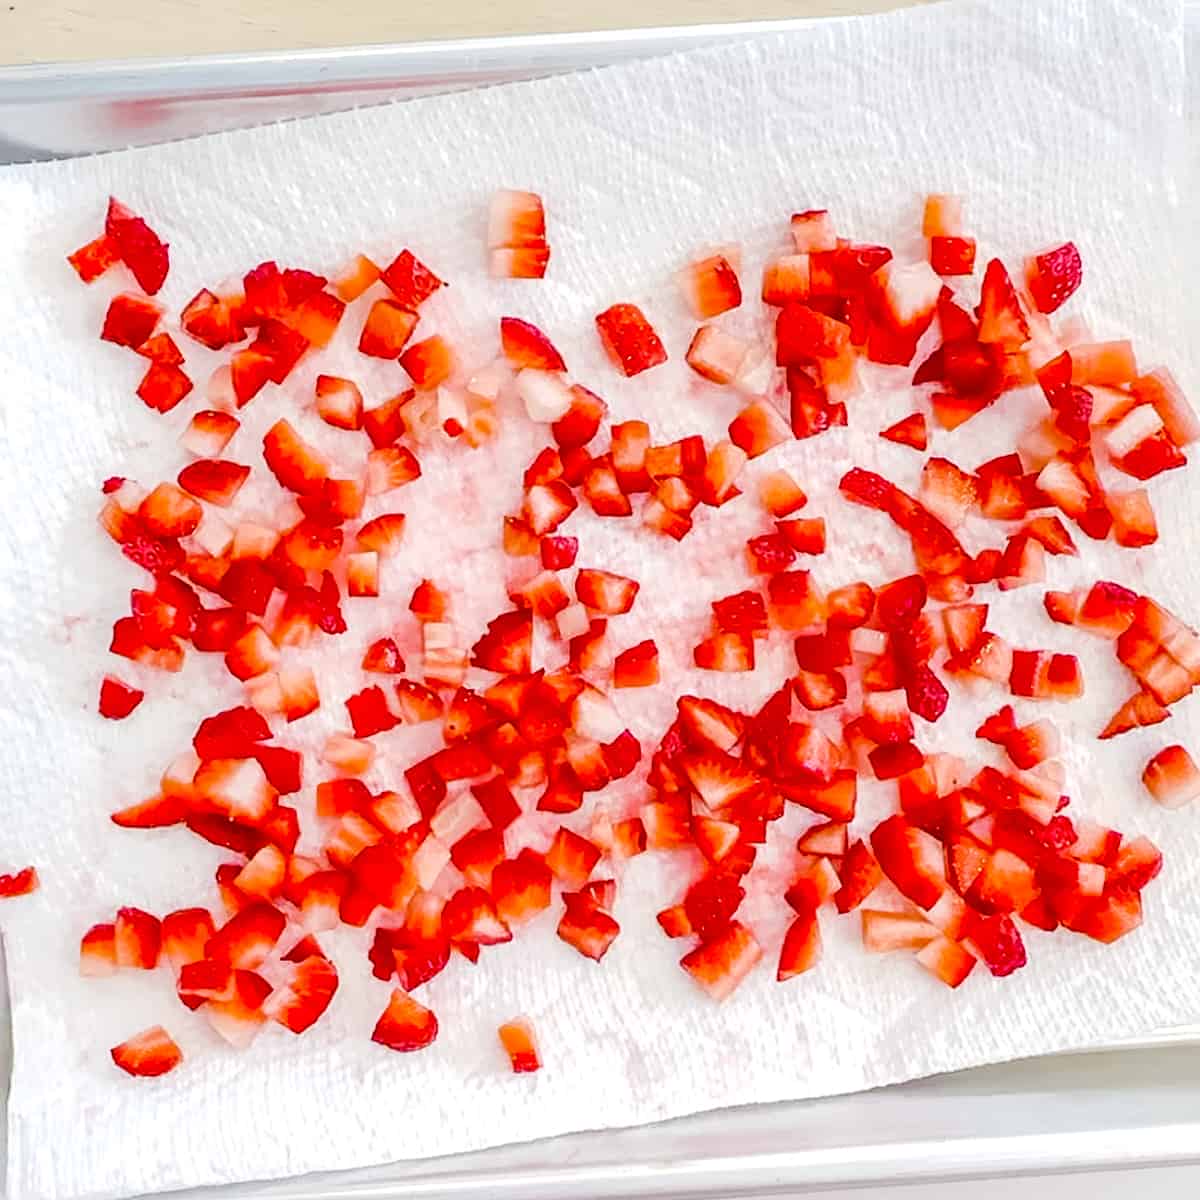 drying diced strawberries on paper towel.